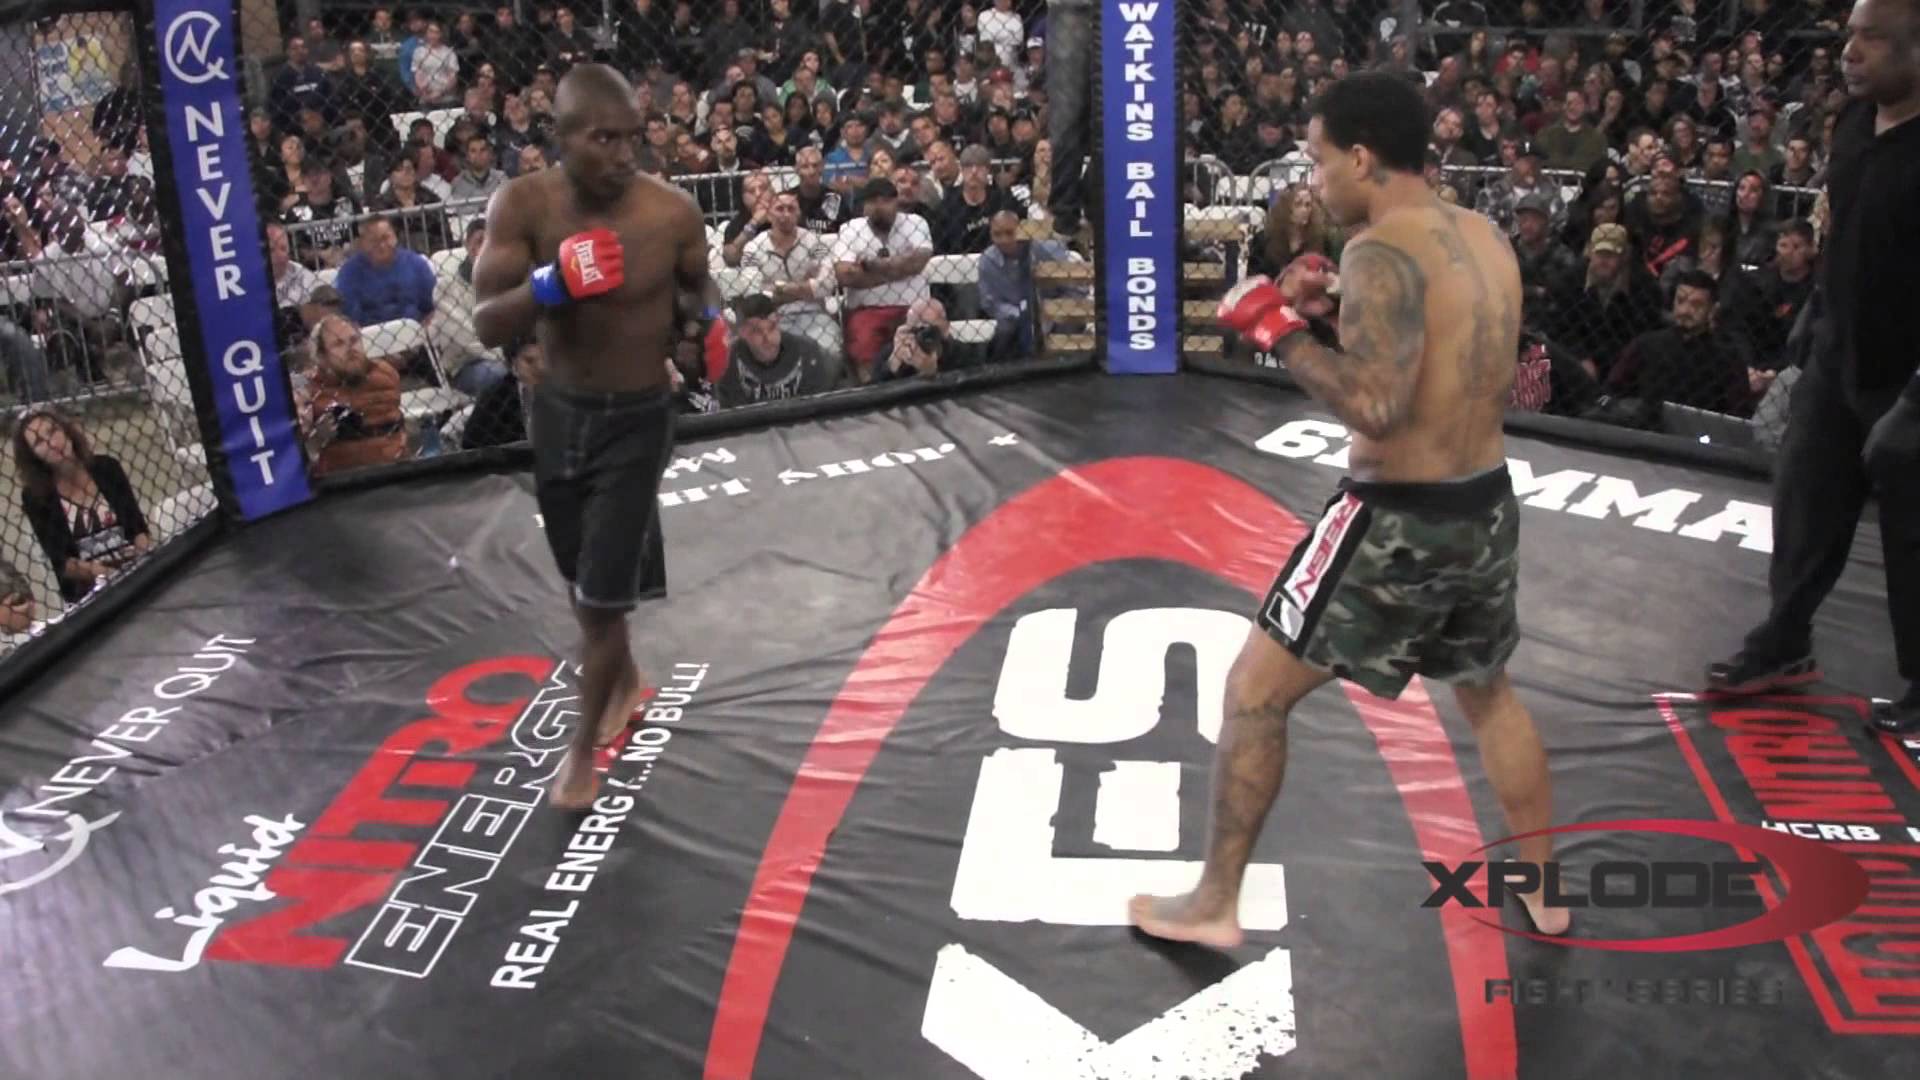 Raja Shippen vs Anthony Moore Xplode Fight Series March 16, 2013 RE...1920 x 1080